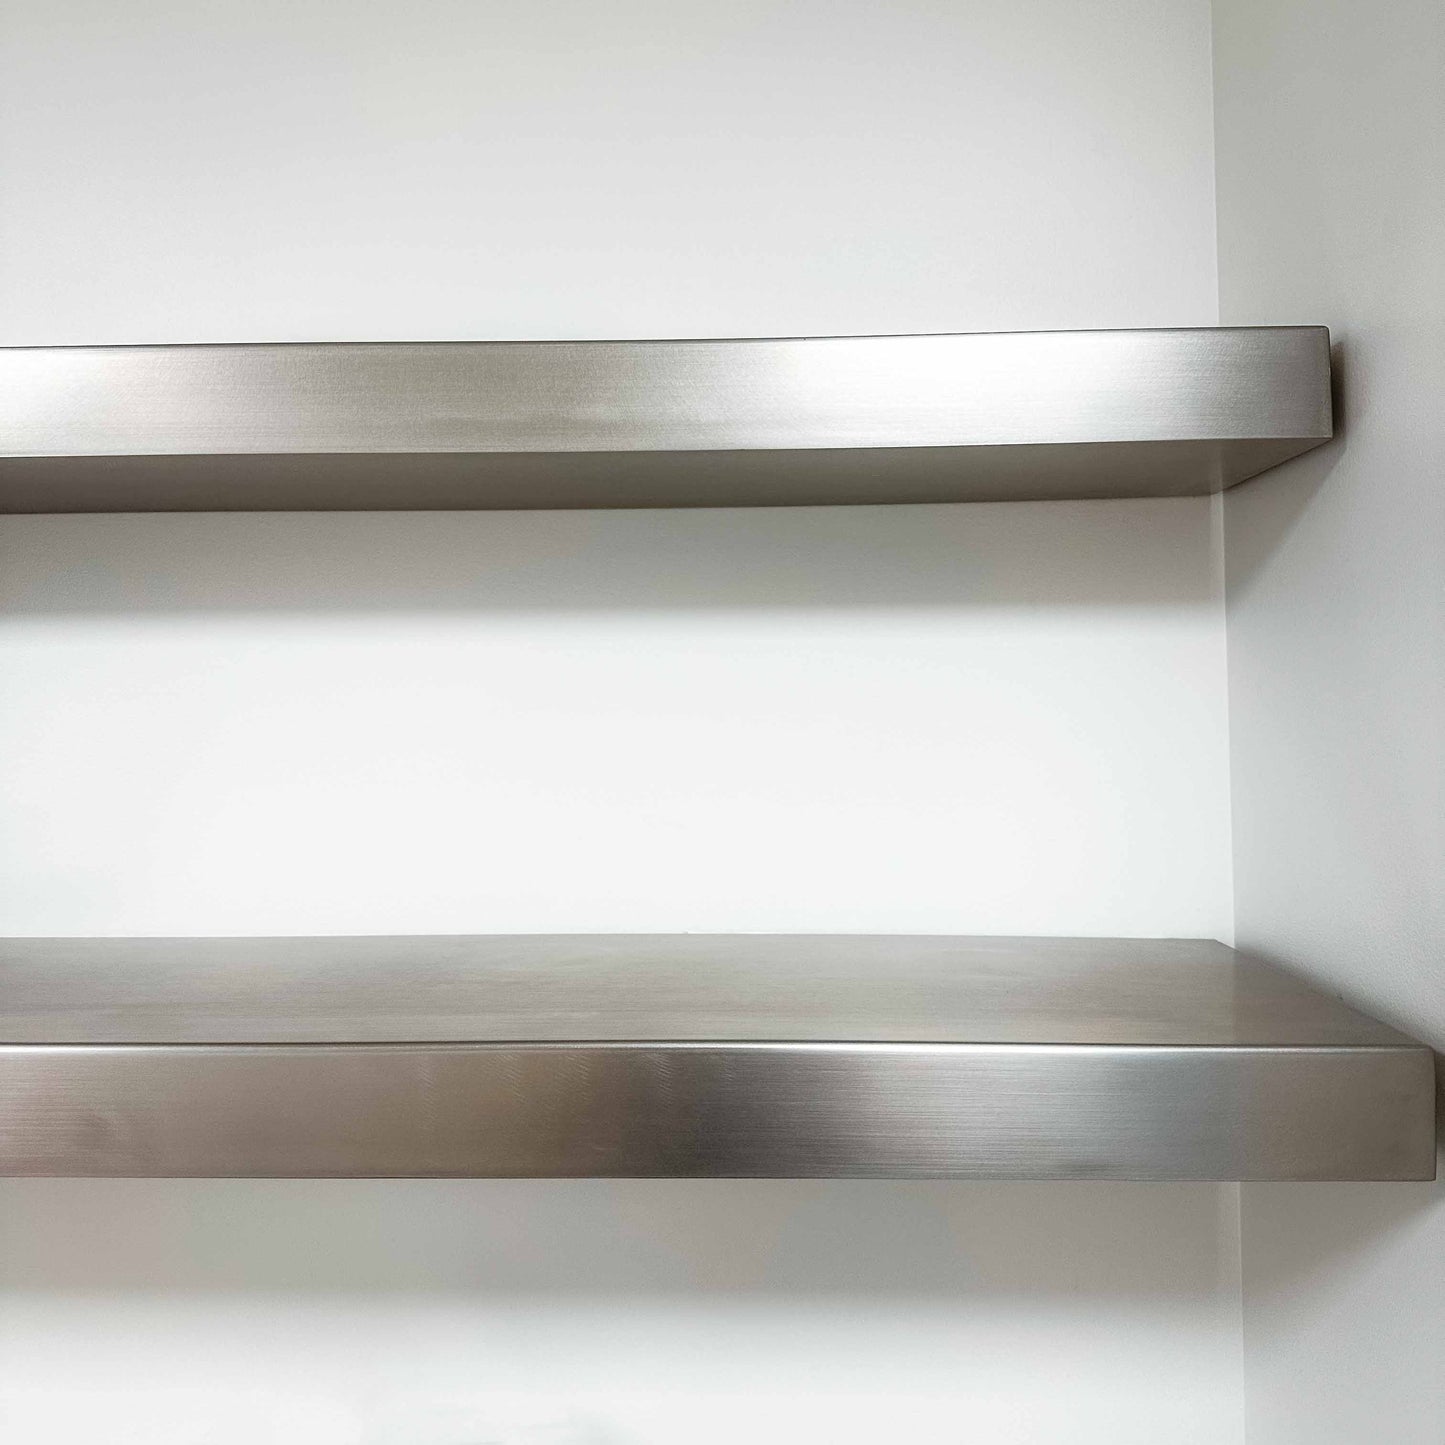 Stainless Steel Floating Shelf 10" Deep for Kitchen, Bathroom and Home